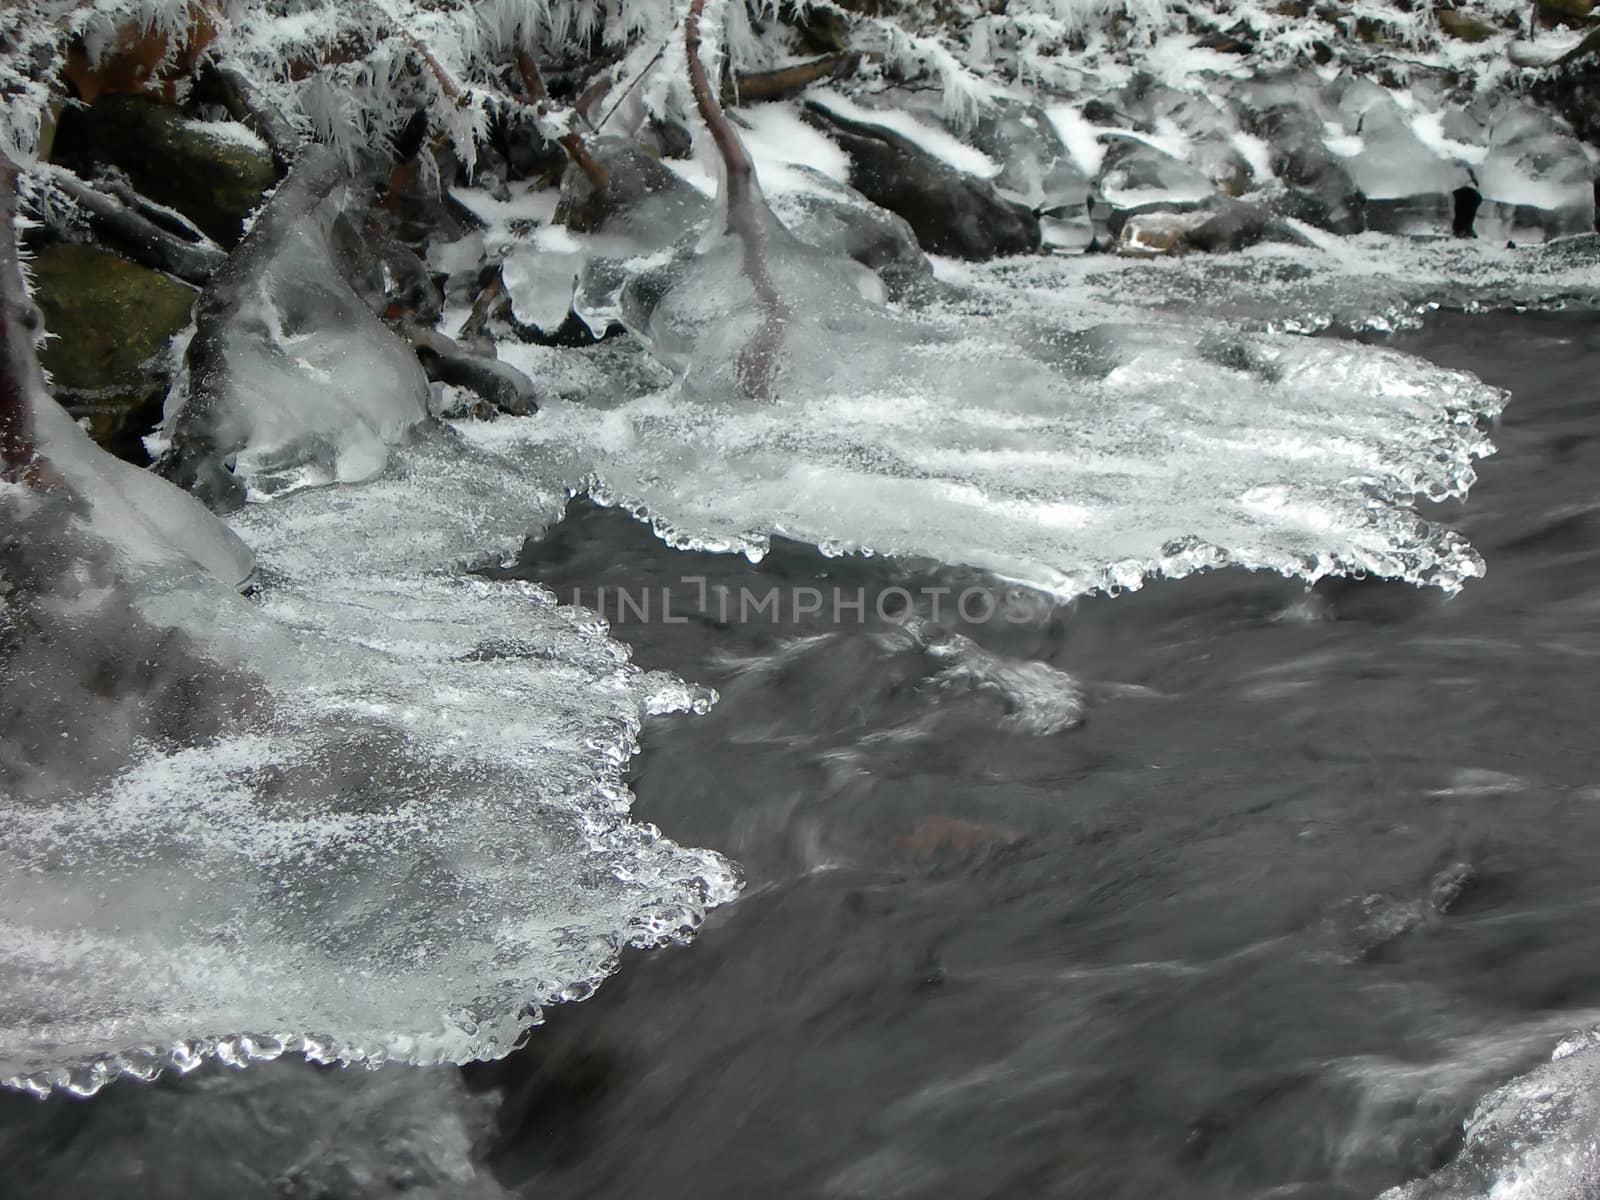               Brook is covered by ice and water flows under them with a small strem          